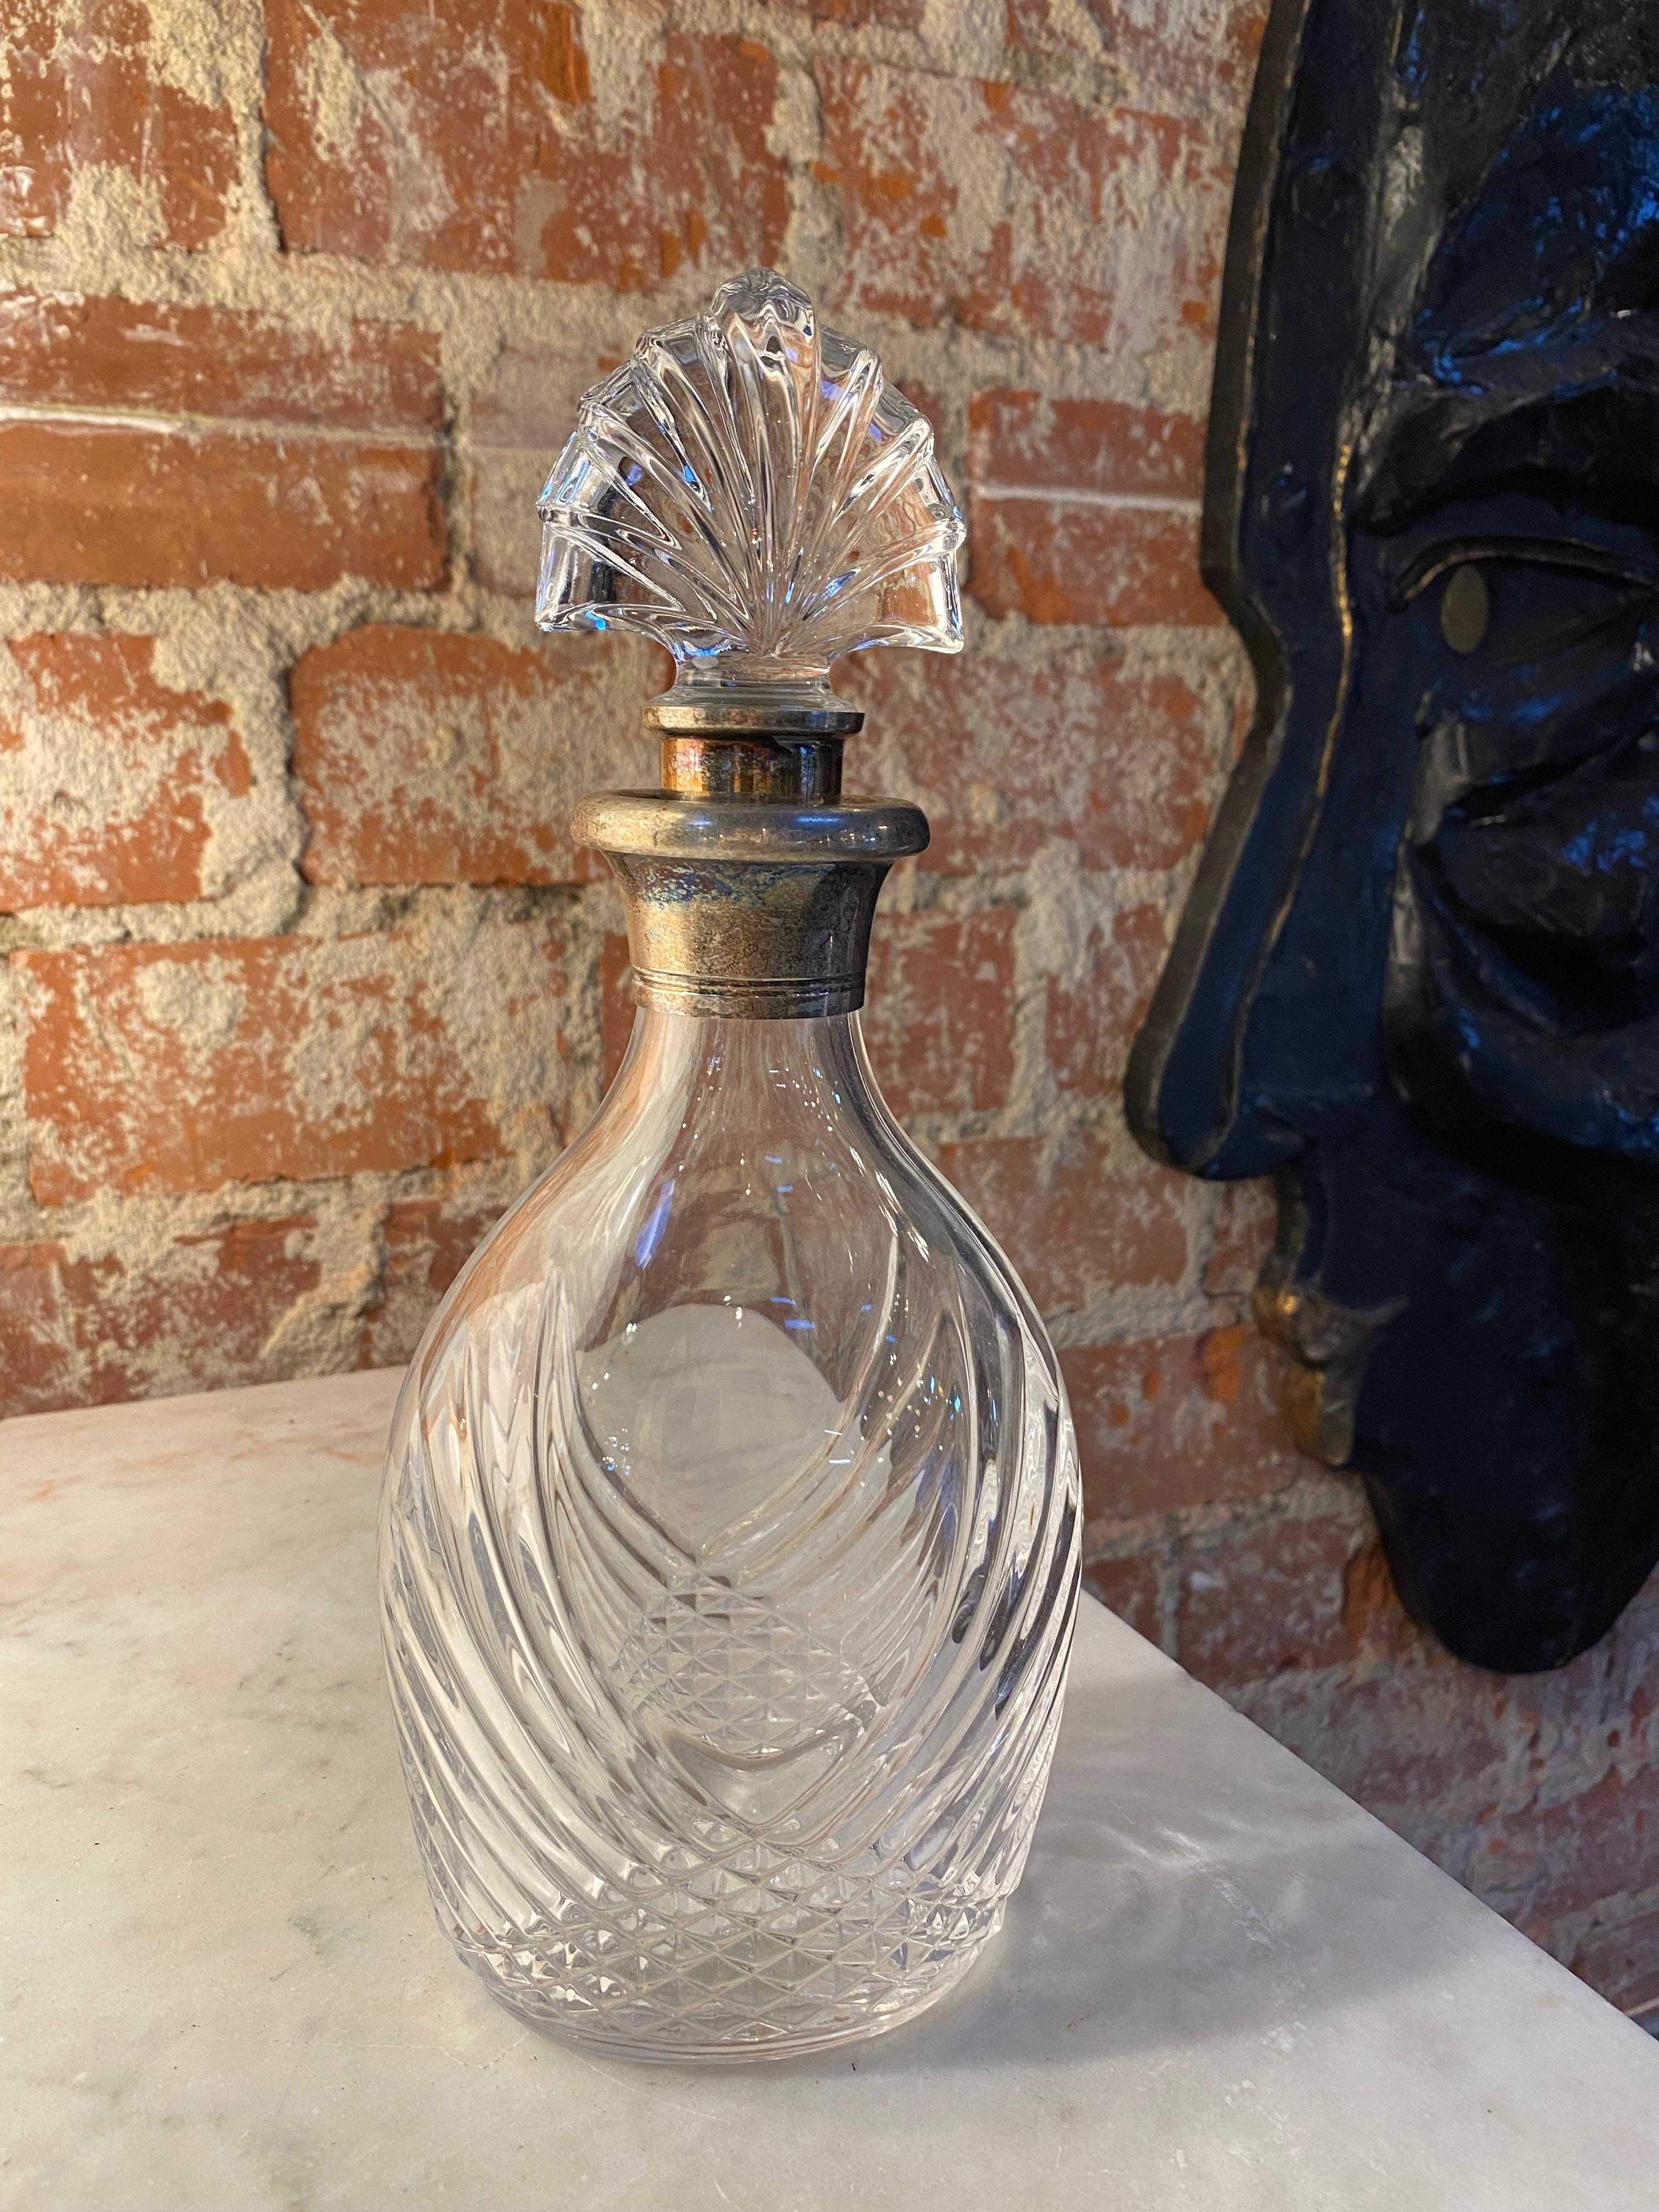 Decorative Italian hand made decanter/bottle made in Italy 1950s.